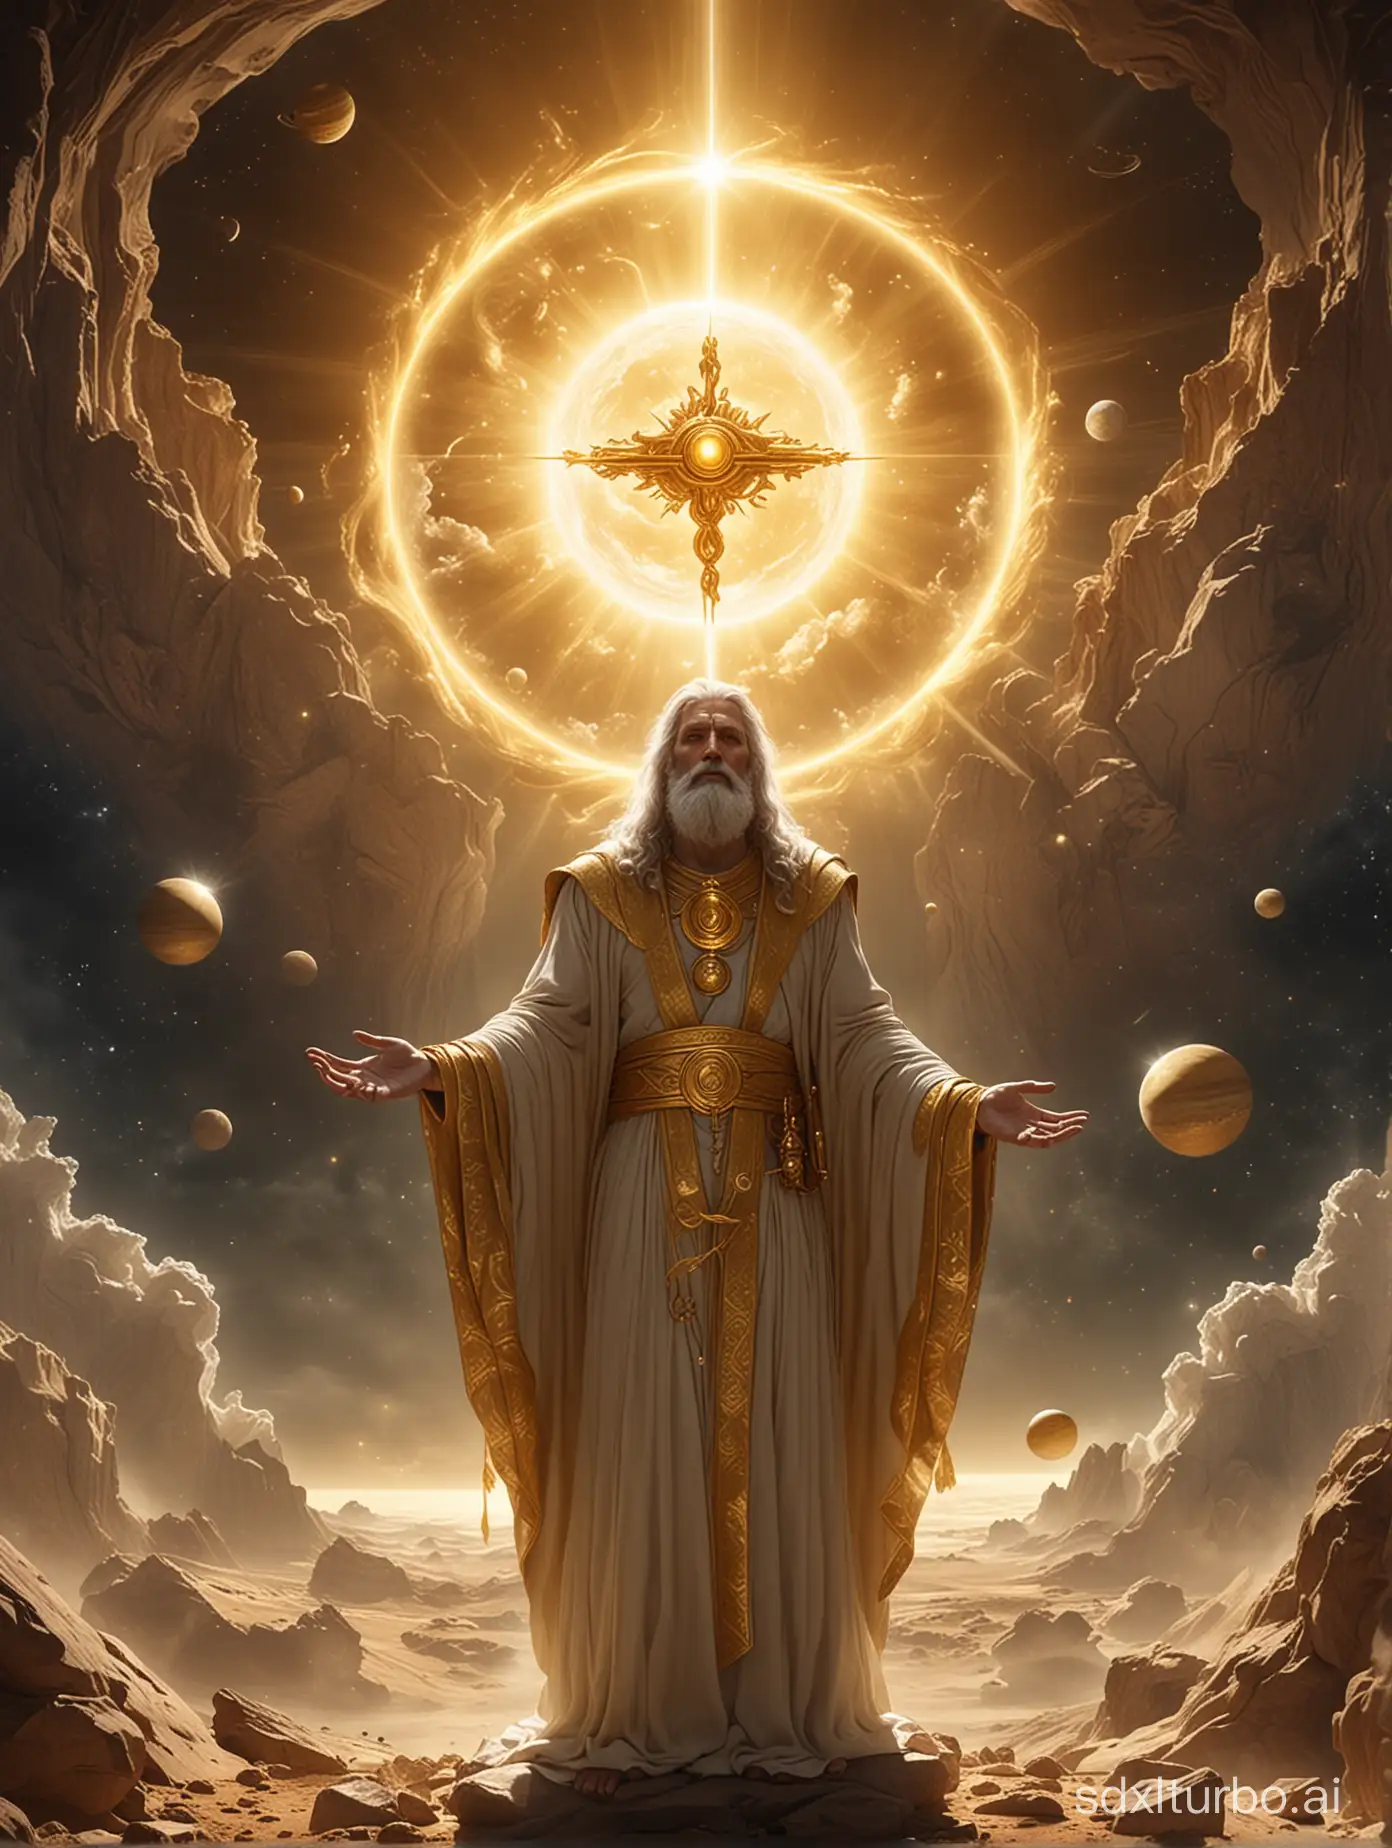 Divine-Figure-Holding-Golden-Spectre-Surrounded-by-Planets